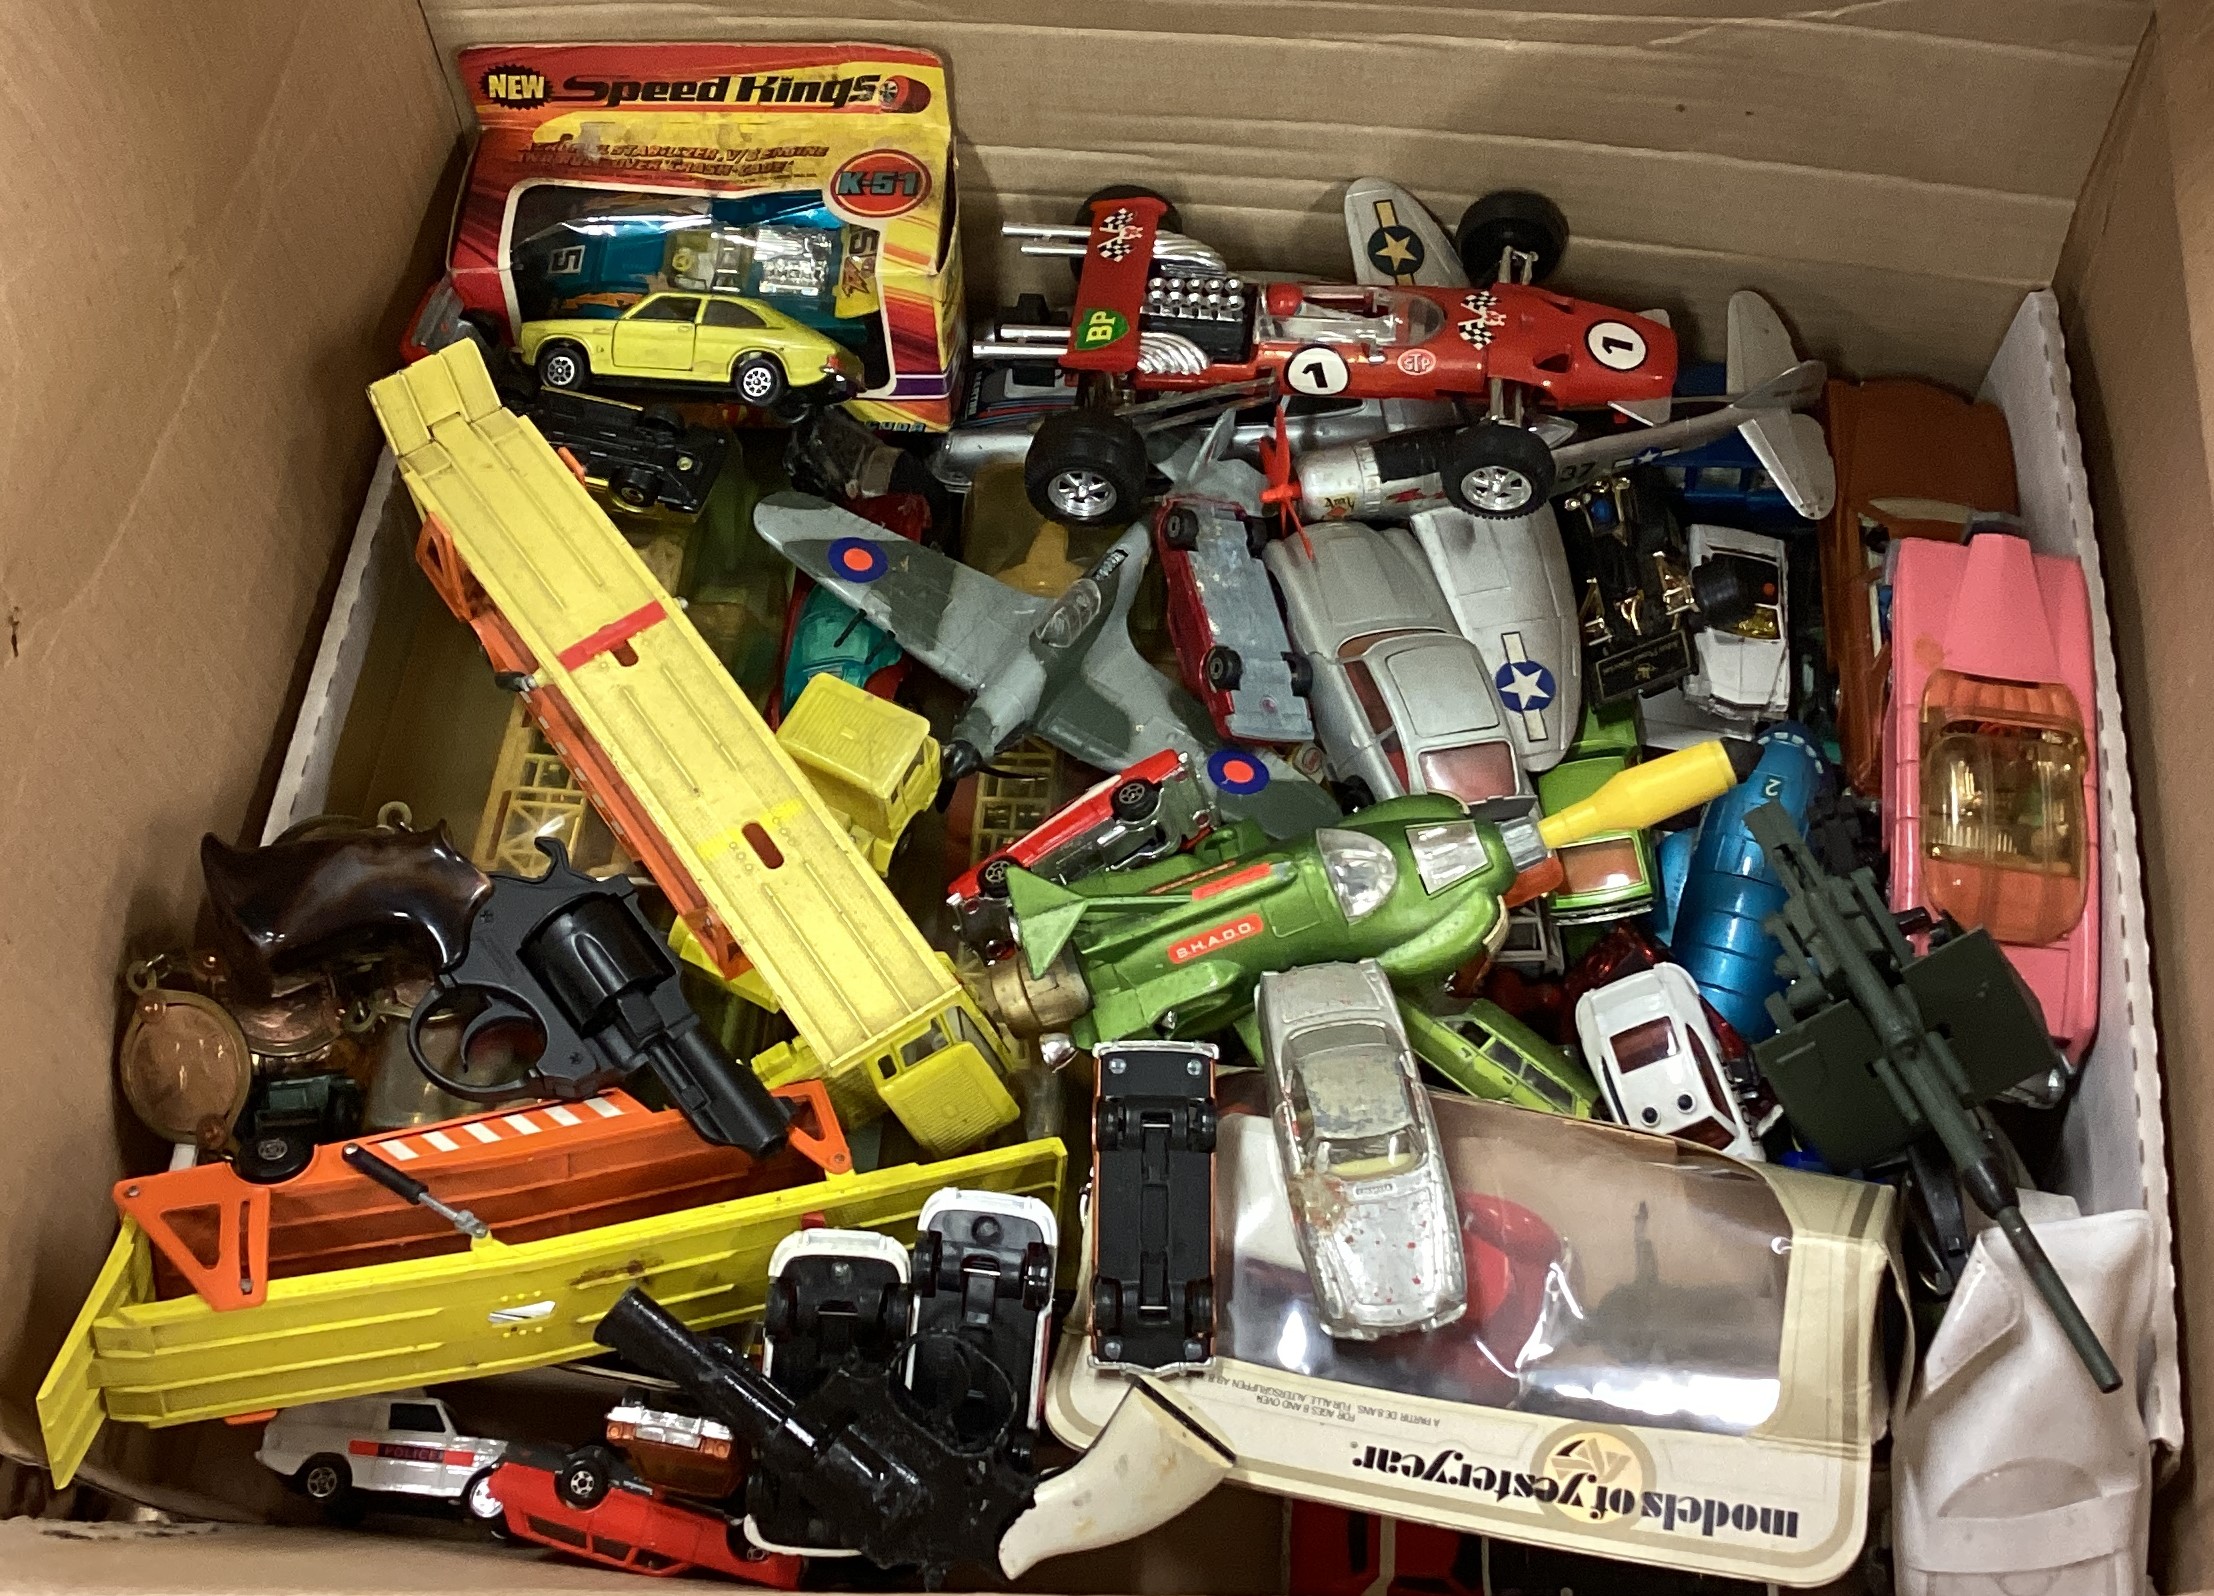 Boxes containing toy cars including Thunderbirds, commemorative carriage etc. - Image 2 of 2